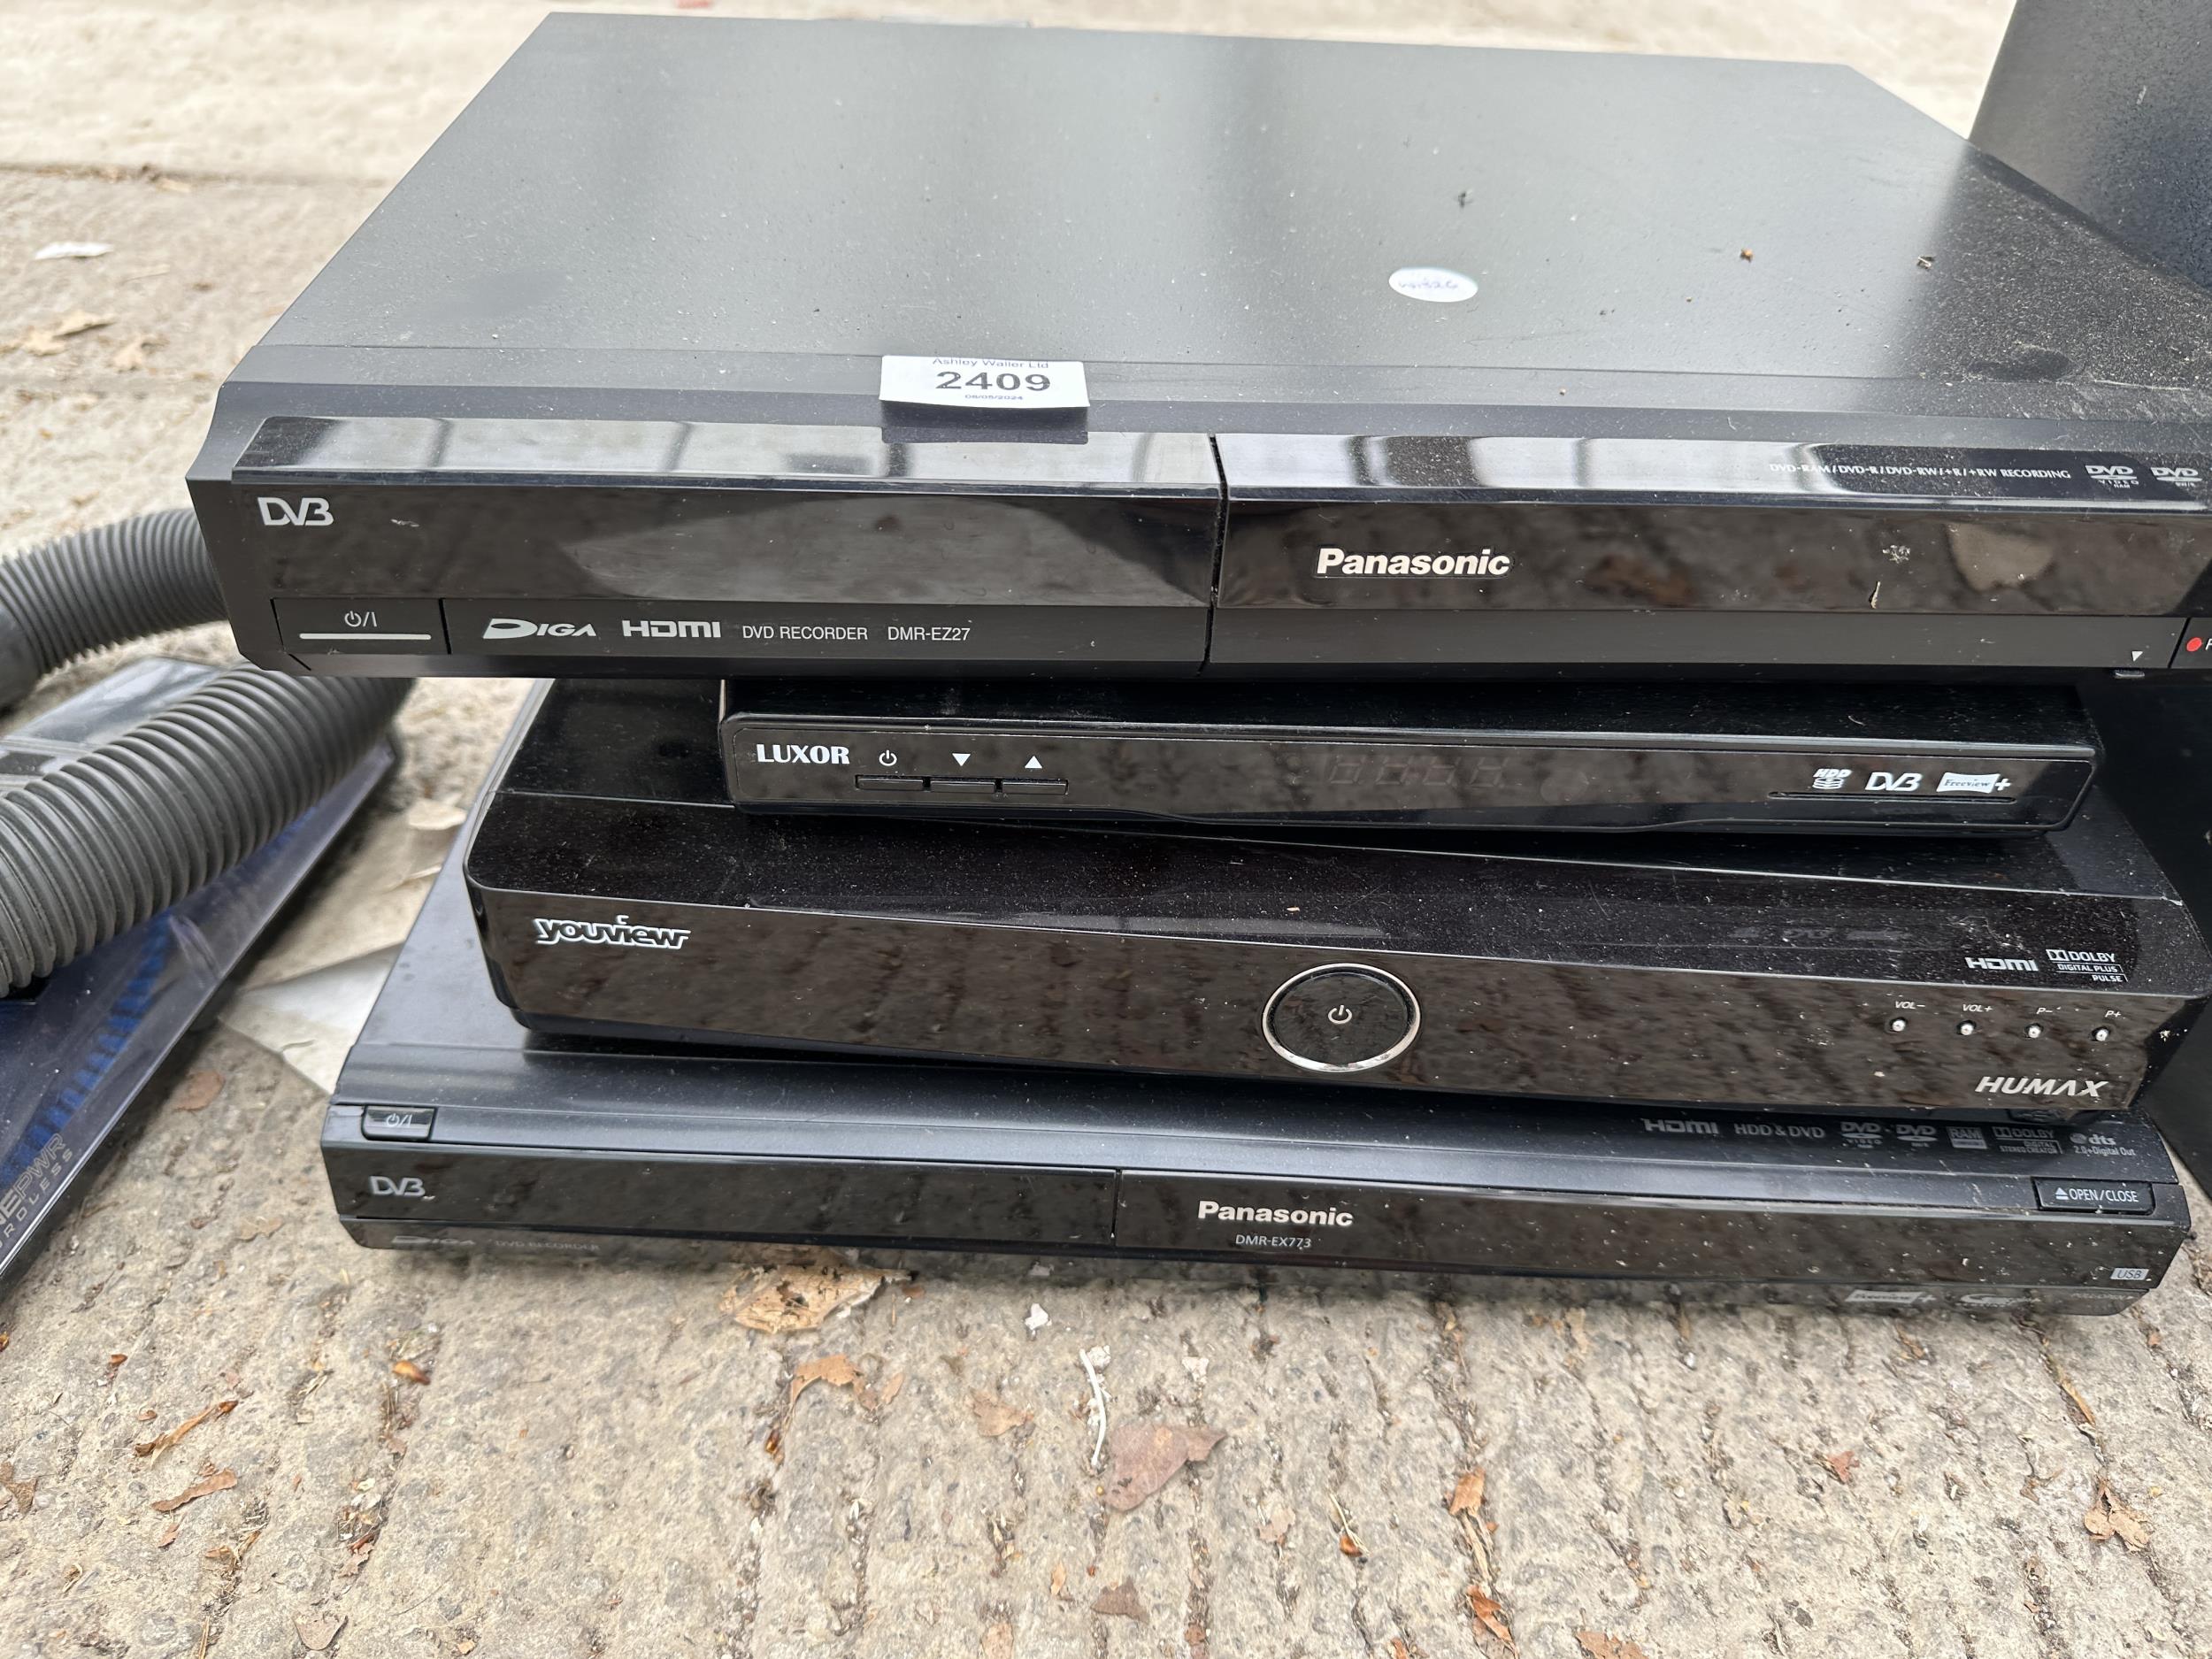 TWO PANASONIC DVD PLAYERS AND TWO FREEVIEW BOXES - Image 2 of 2